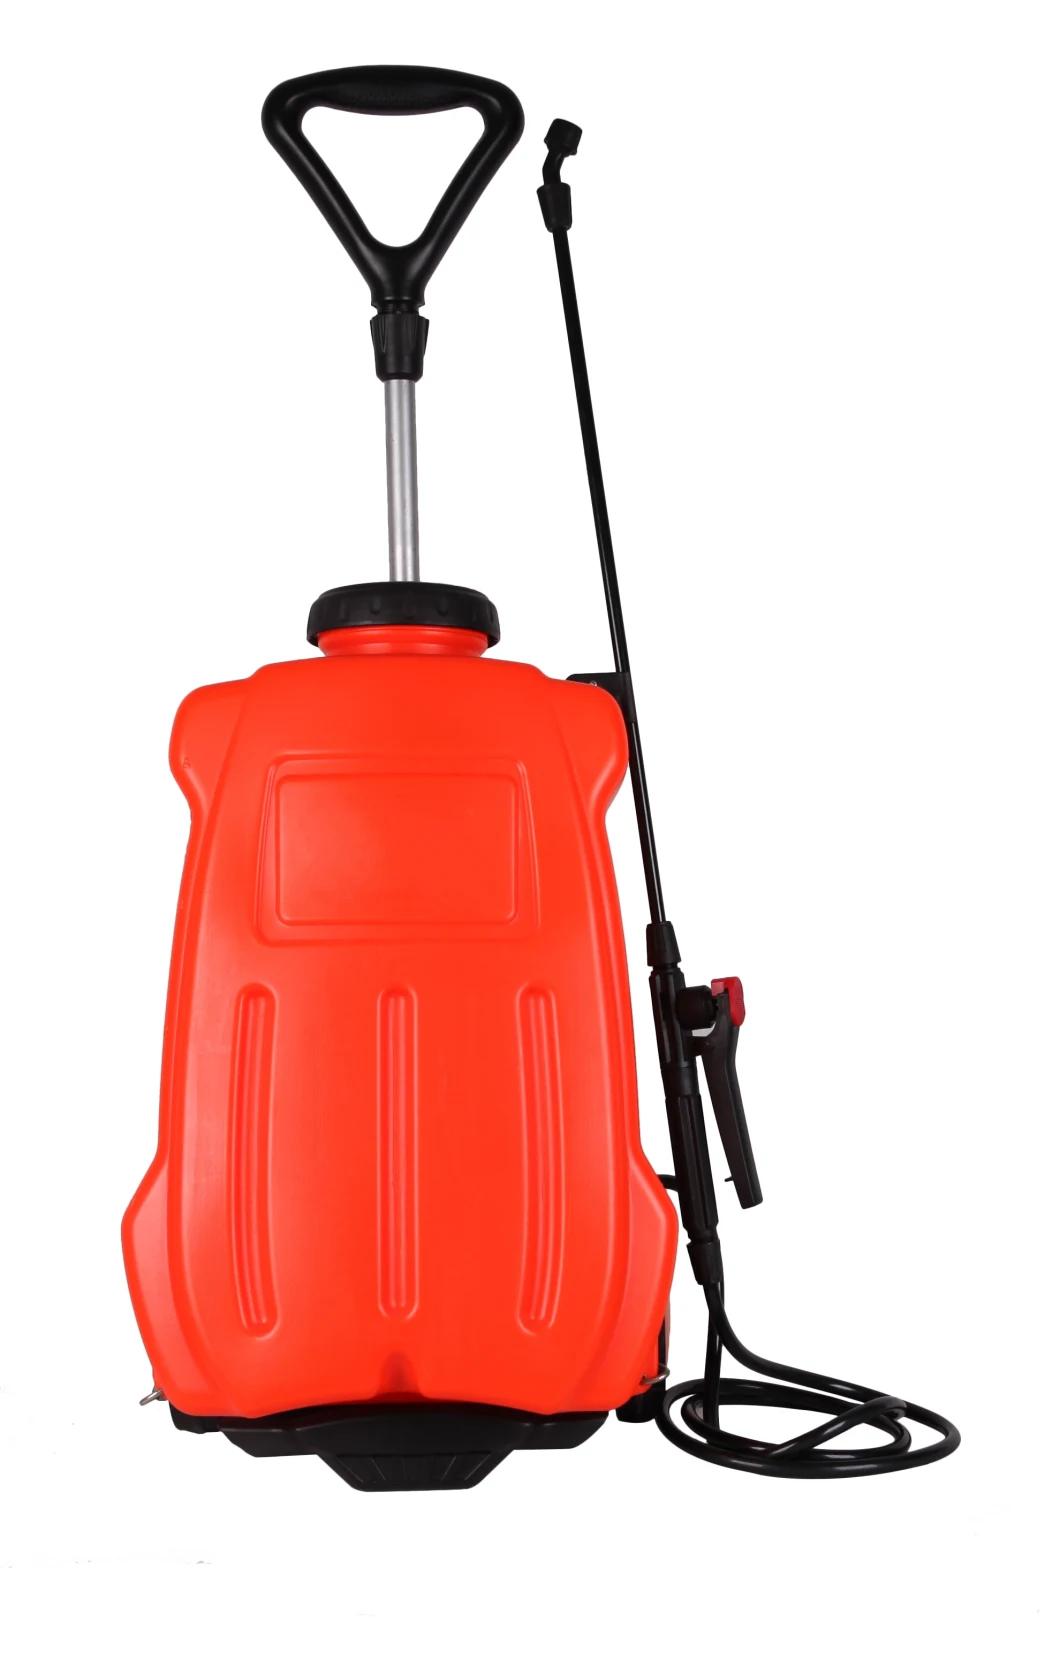 16L Plastic Electric/Battery Backpack Manual Agriculture Sprayer